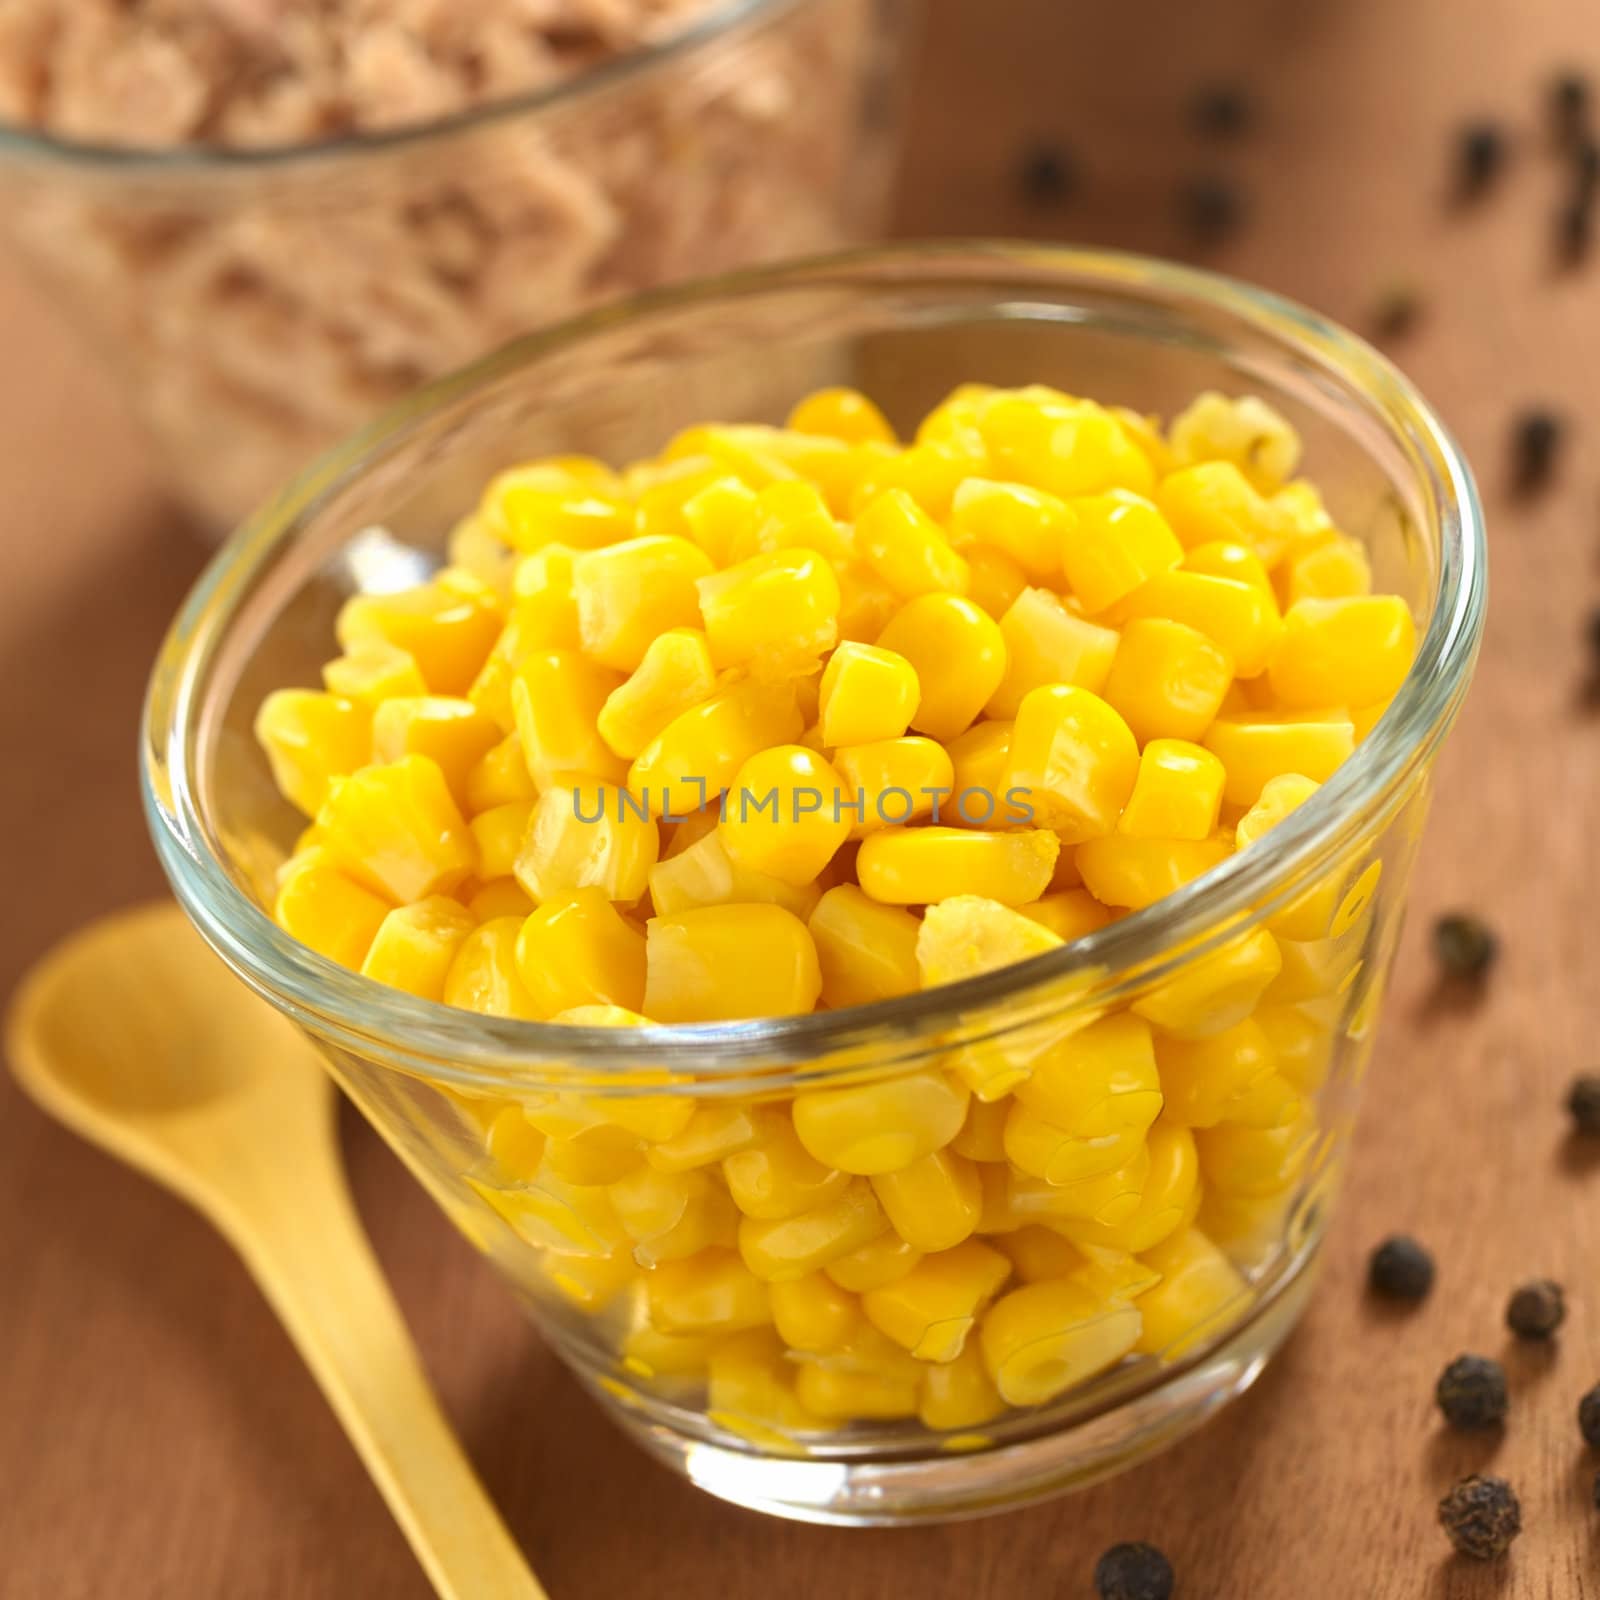 Sweet corn grains and tuna in glass bowls with black pepper corns on the side (Selective Focus, Focus one third into the corn)